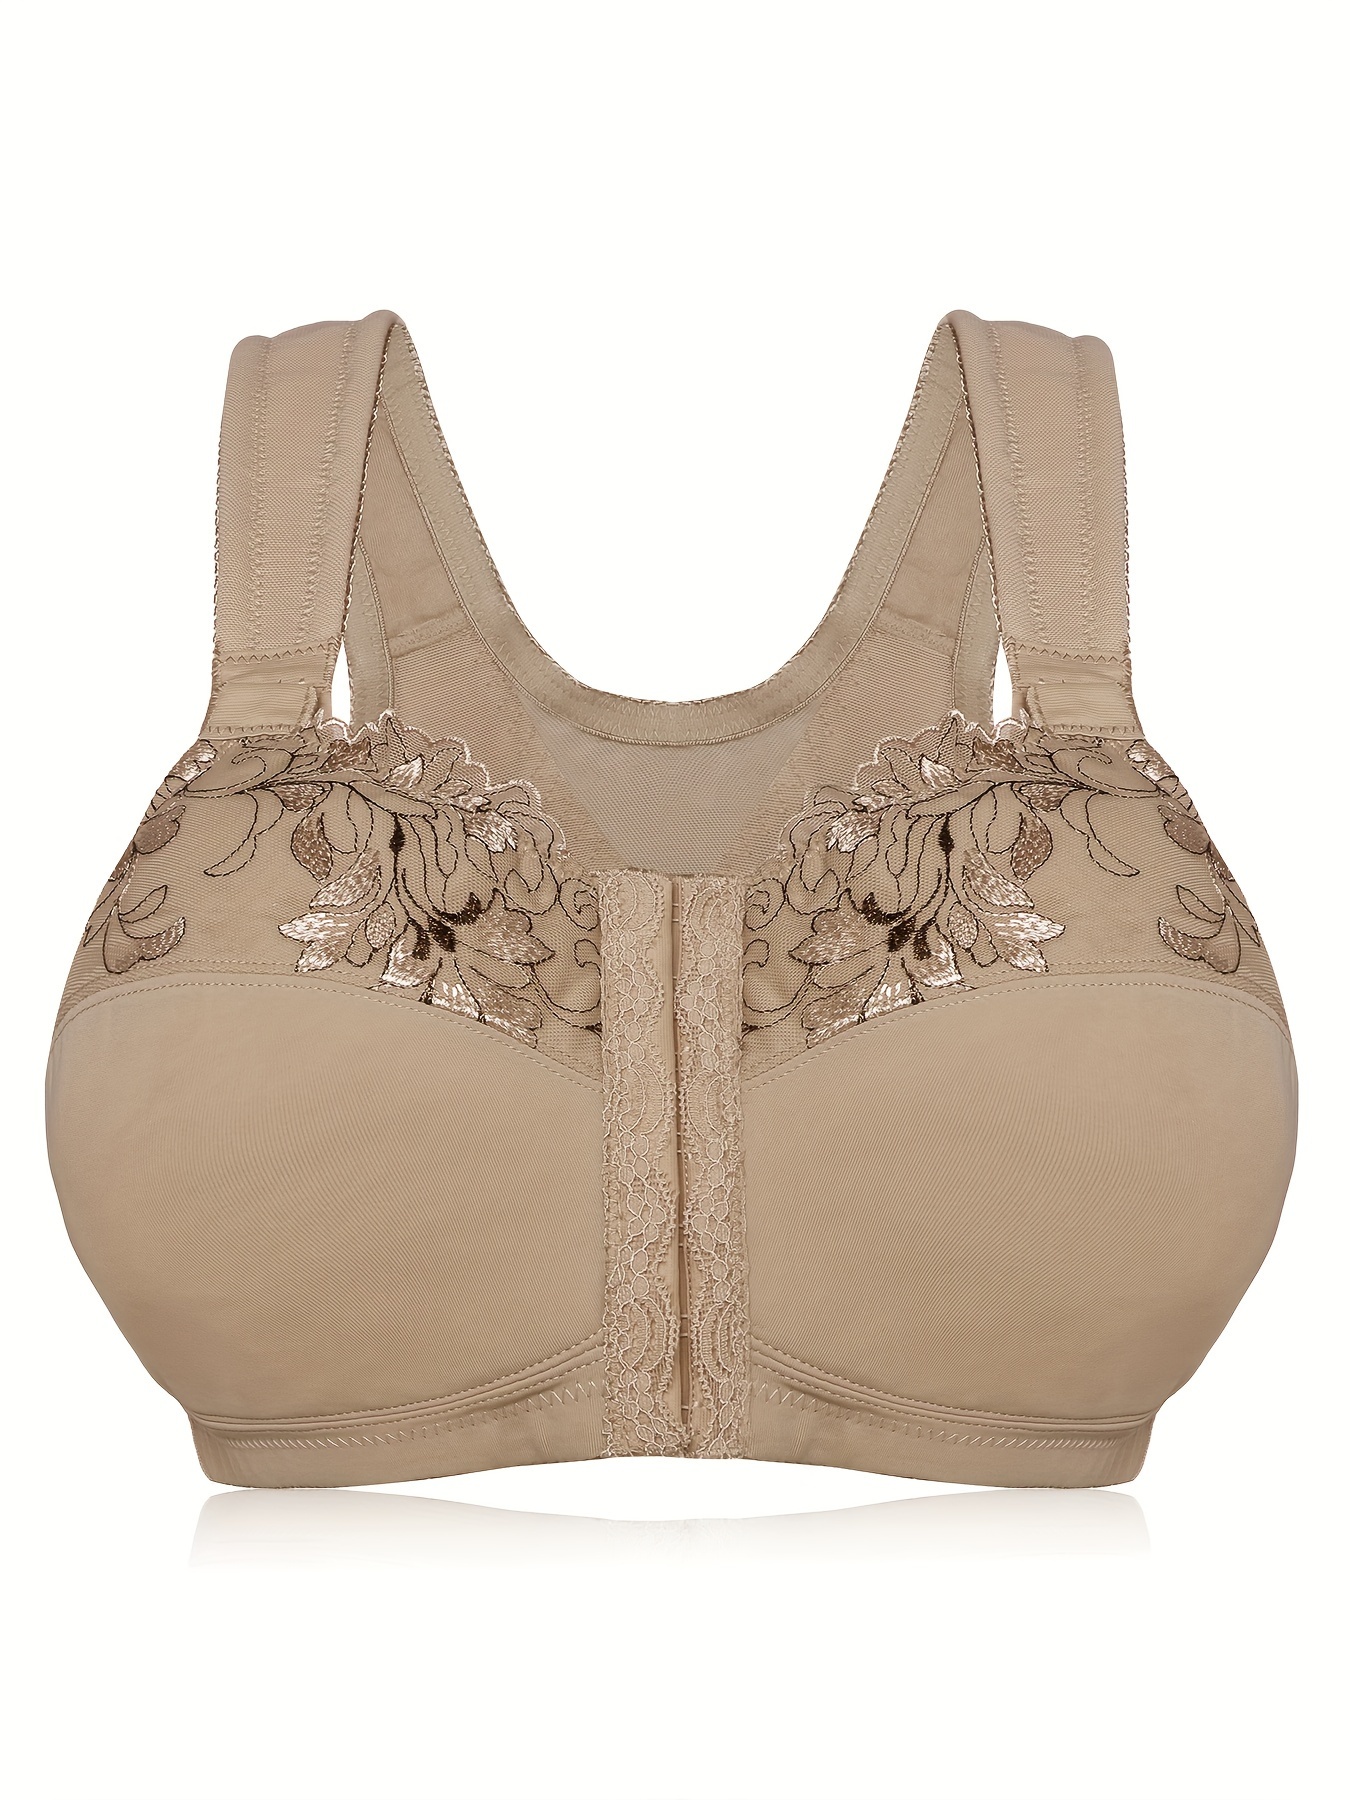  Women's Full Coverage Everyday Bra Wirefree Push Up Seamless  Lace Underwire Bralettes Underwear Comfort Soft Girl Sports Beige : Sports  & Outdoors